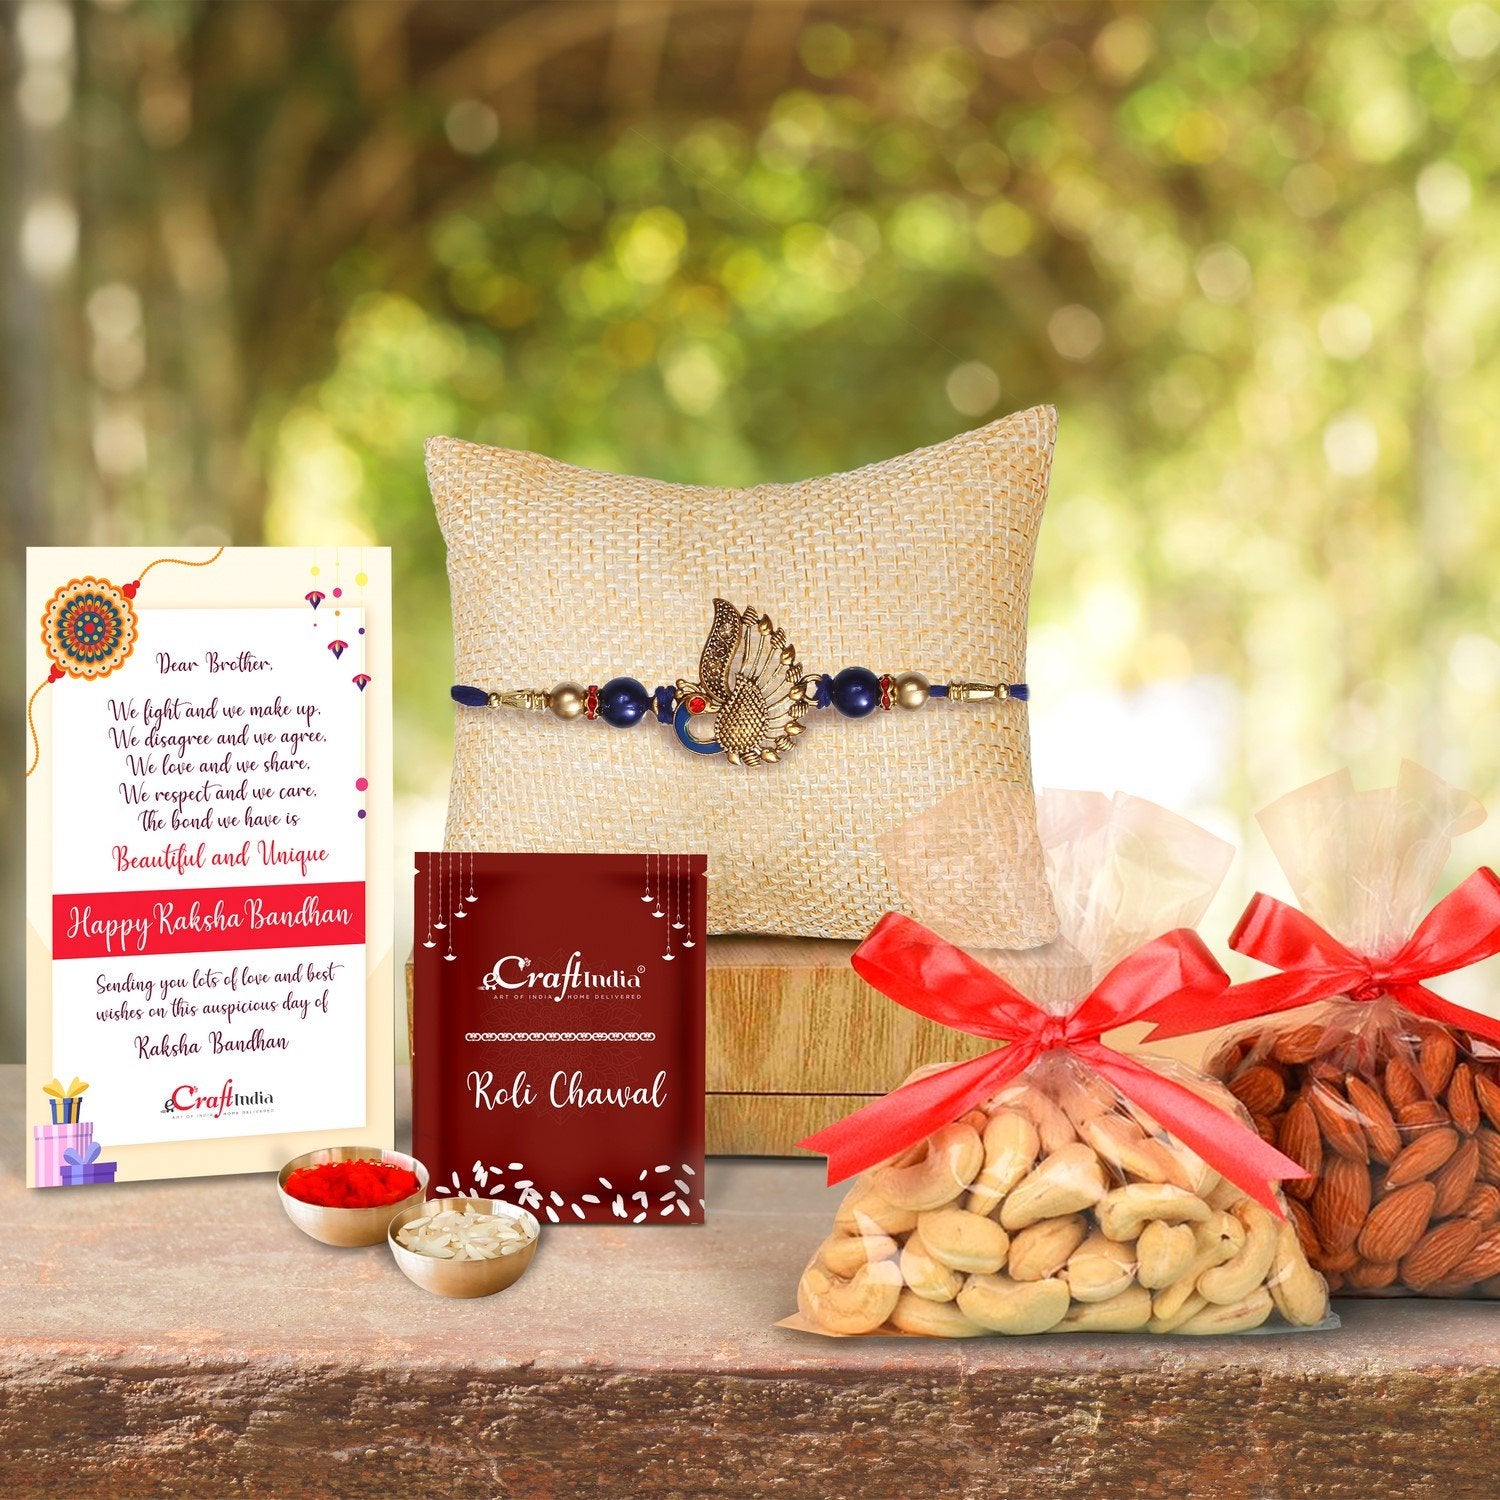 Designer Peacock Rakhi with Badam and Cashew (200 gm each, total 400 gm) and Roli Chawal Pack, Best Wishes Greeting Card